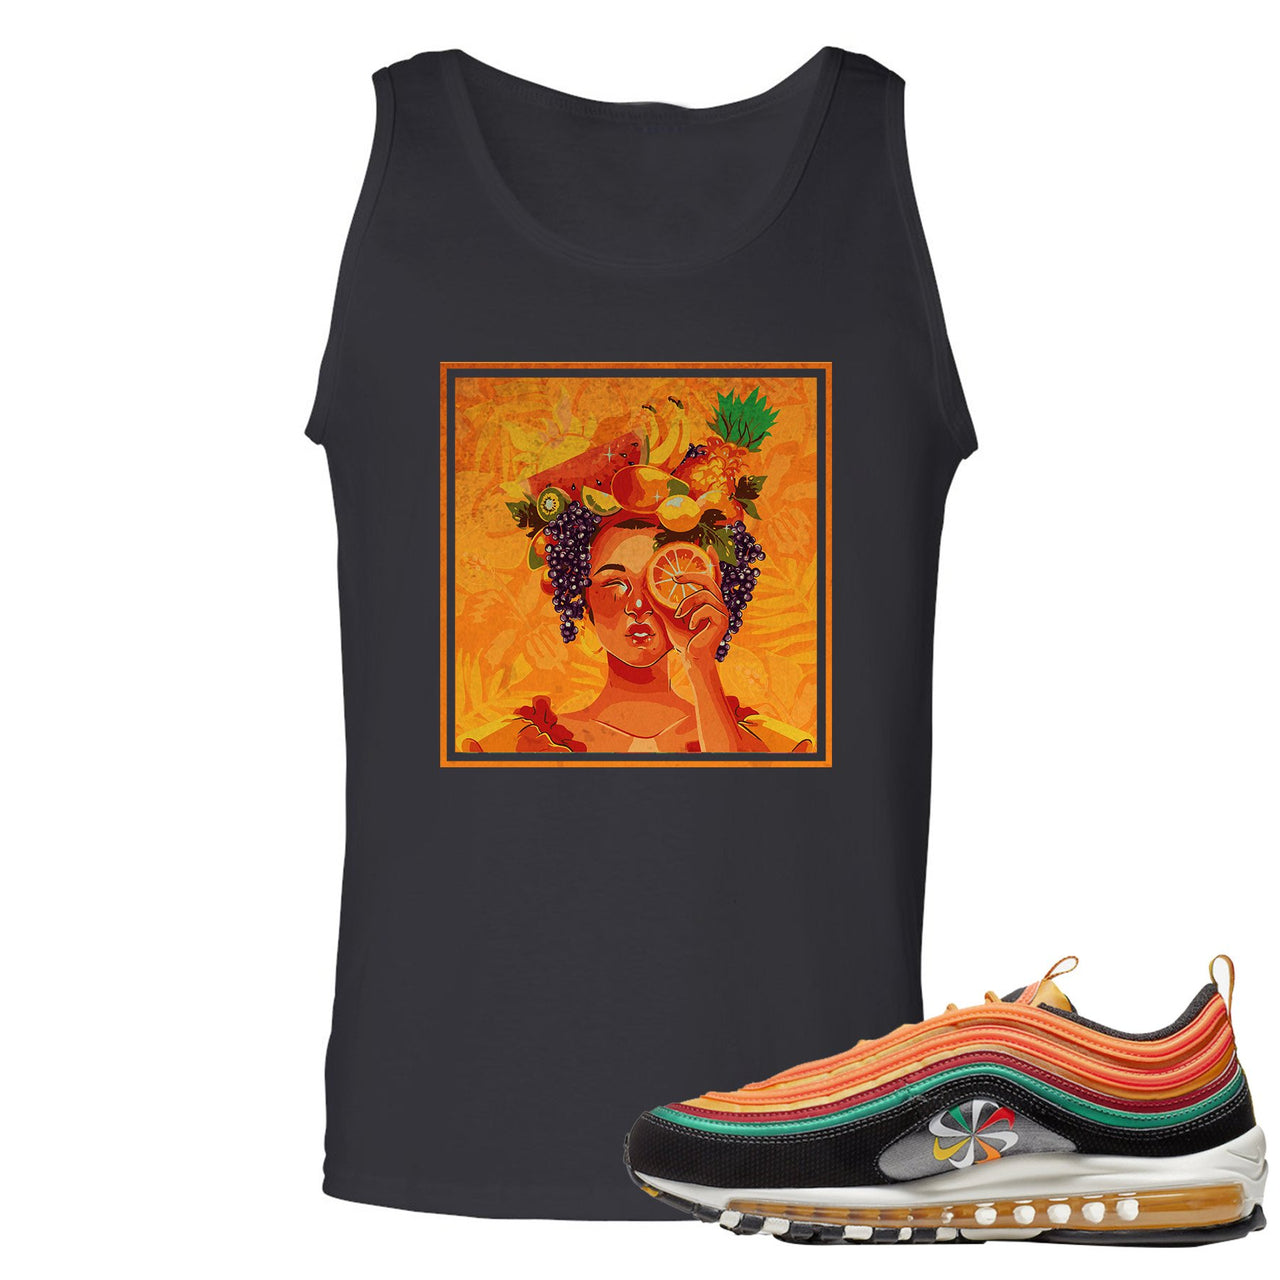 Printed on the front of the Air Max 97 Sunburst black sneaker matching tank top is the Lady Fruit logo